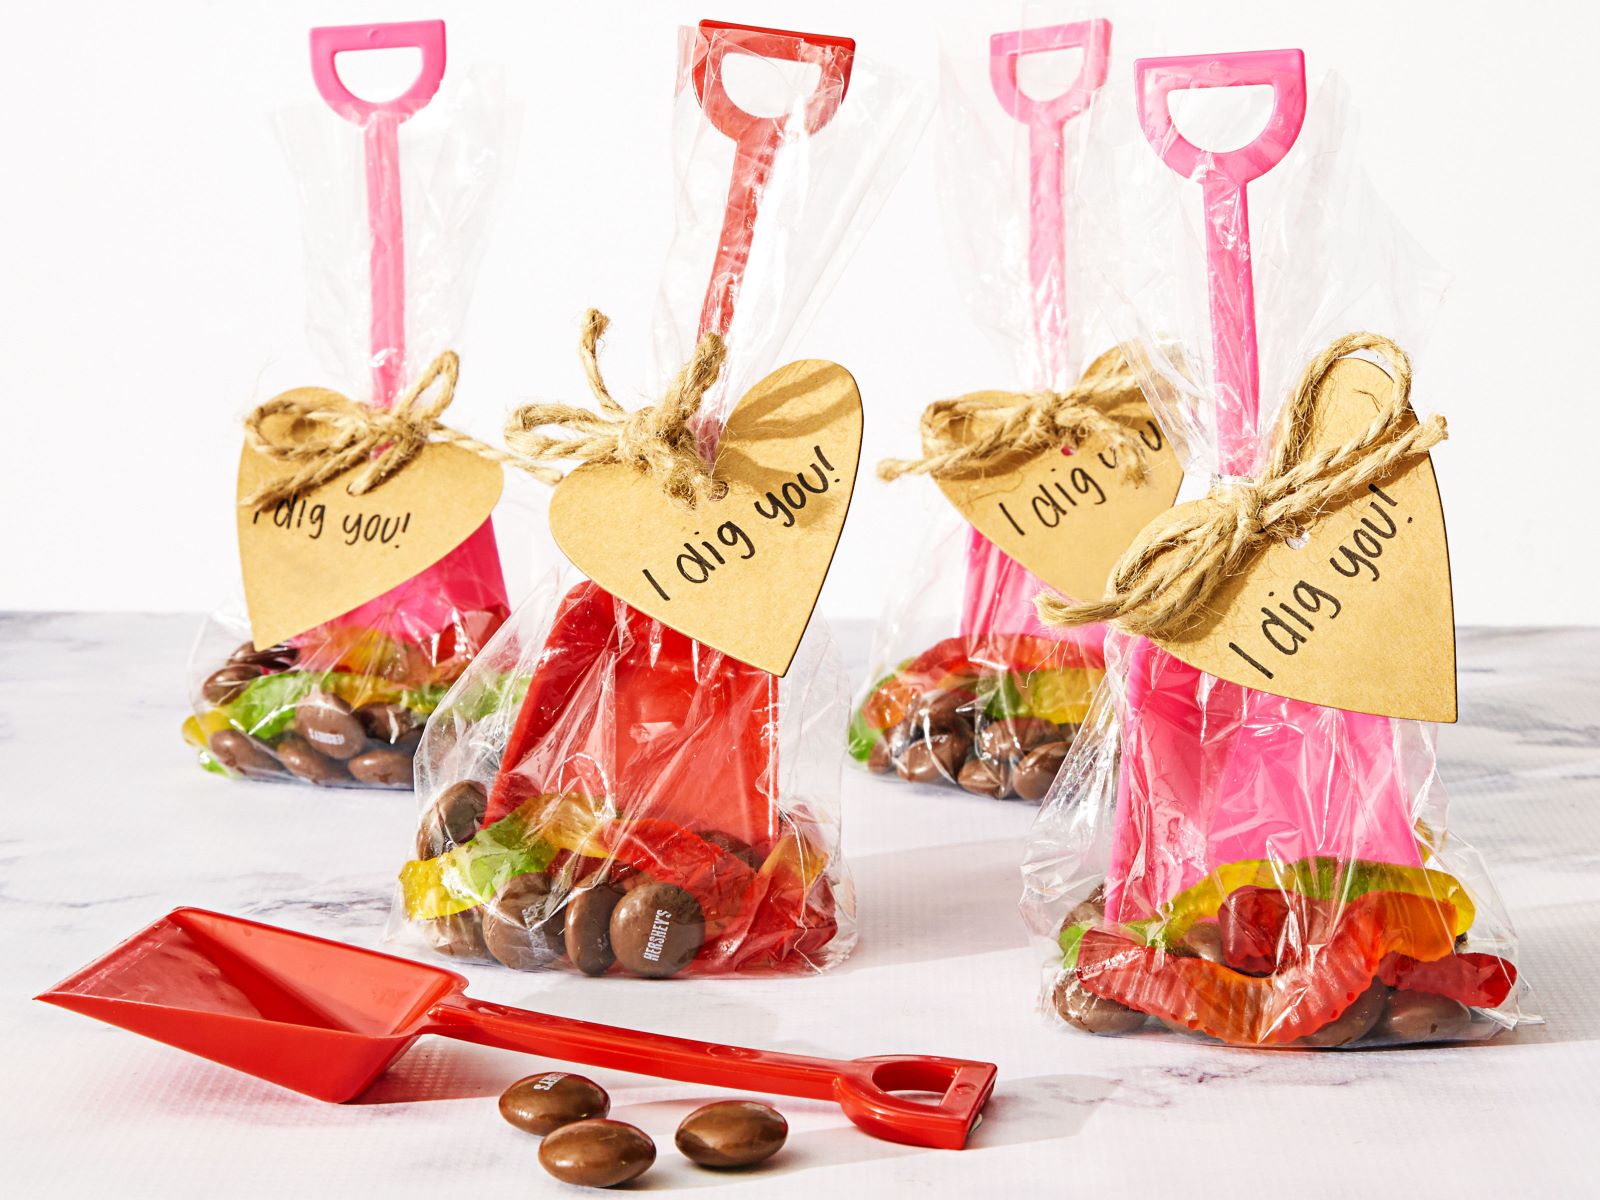 DIY Valentine’s Day Goodie Bags: Creative Home Improvement Ideas For A Romantic Touch